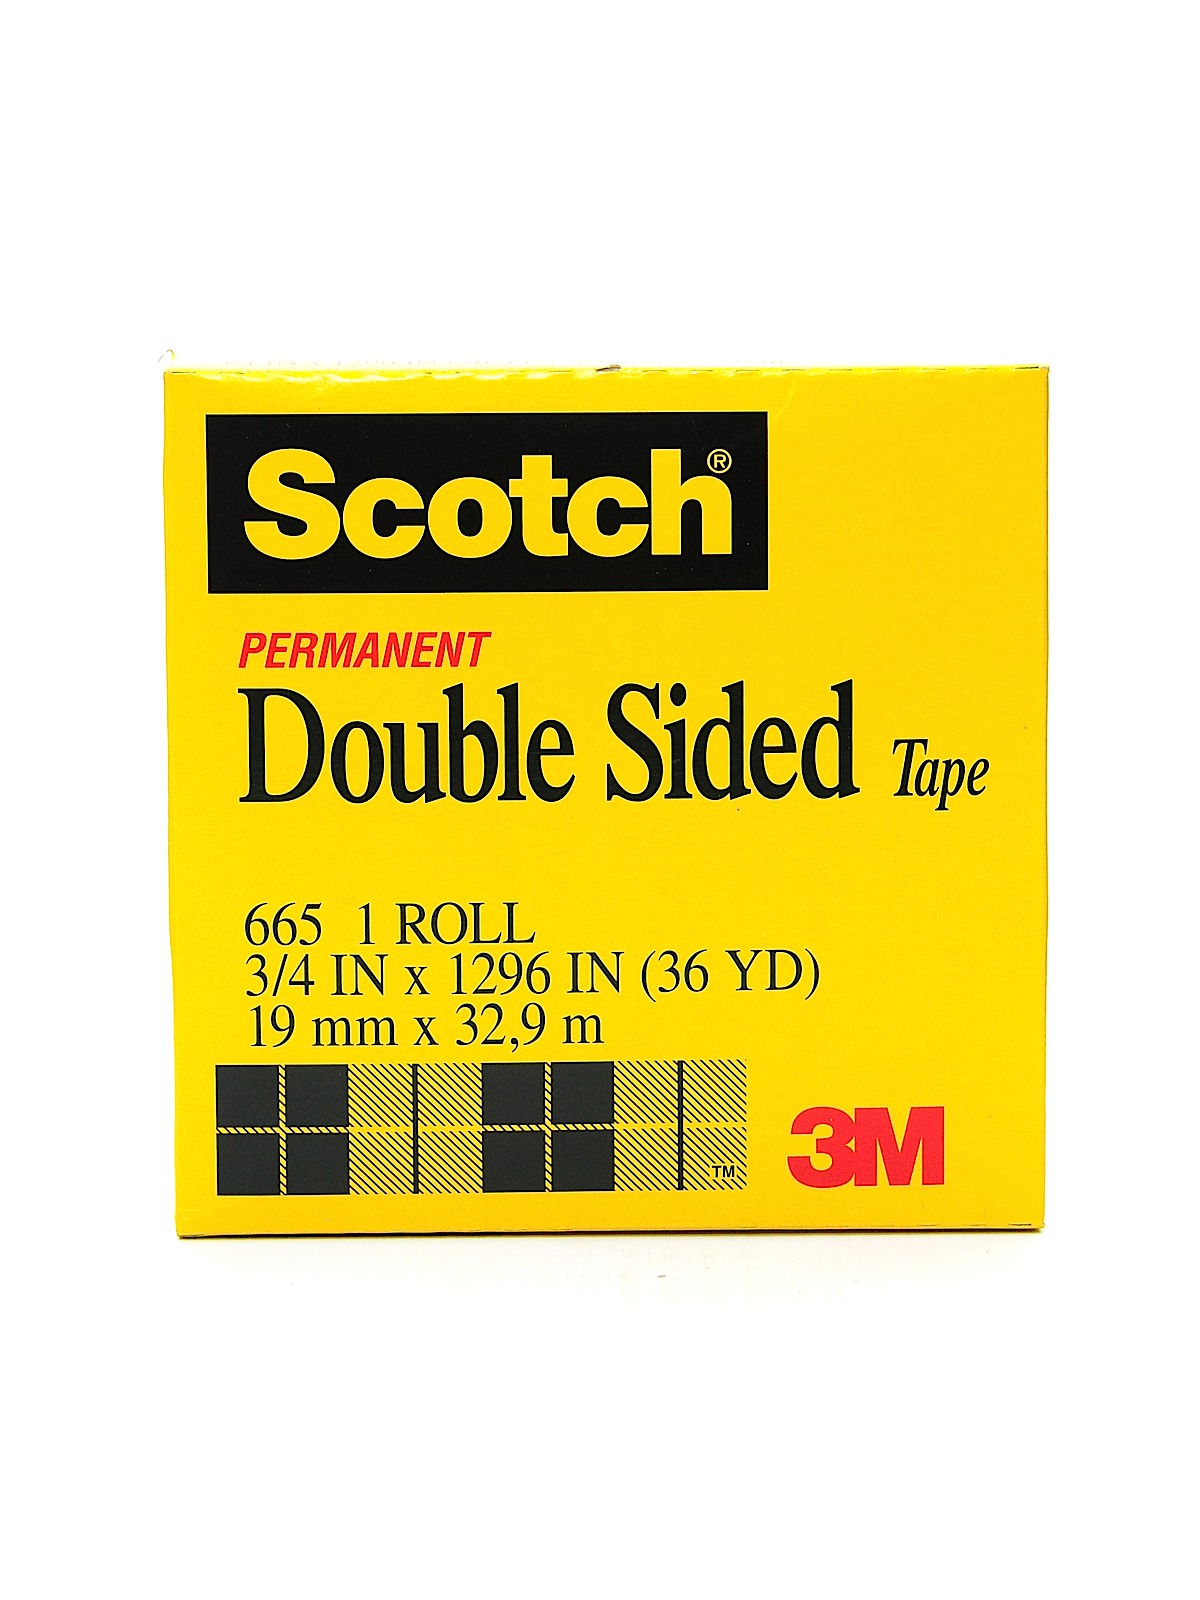 Permanent Double Sided Tape 3 4 In. X 36 Yd. Roll With 3 In. Core 665